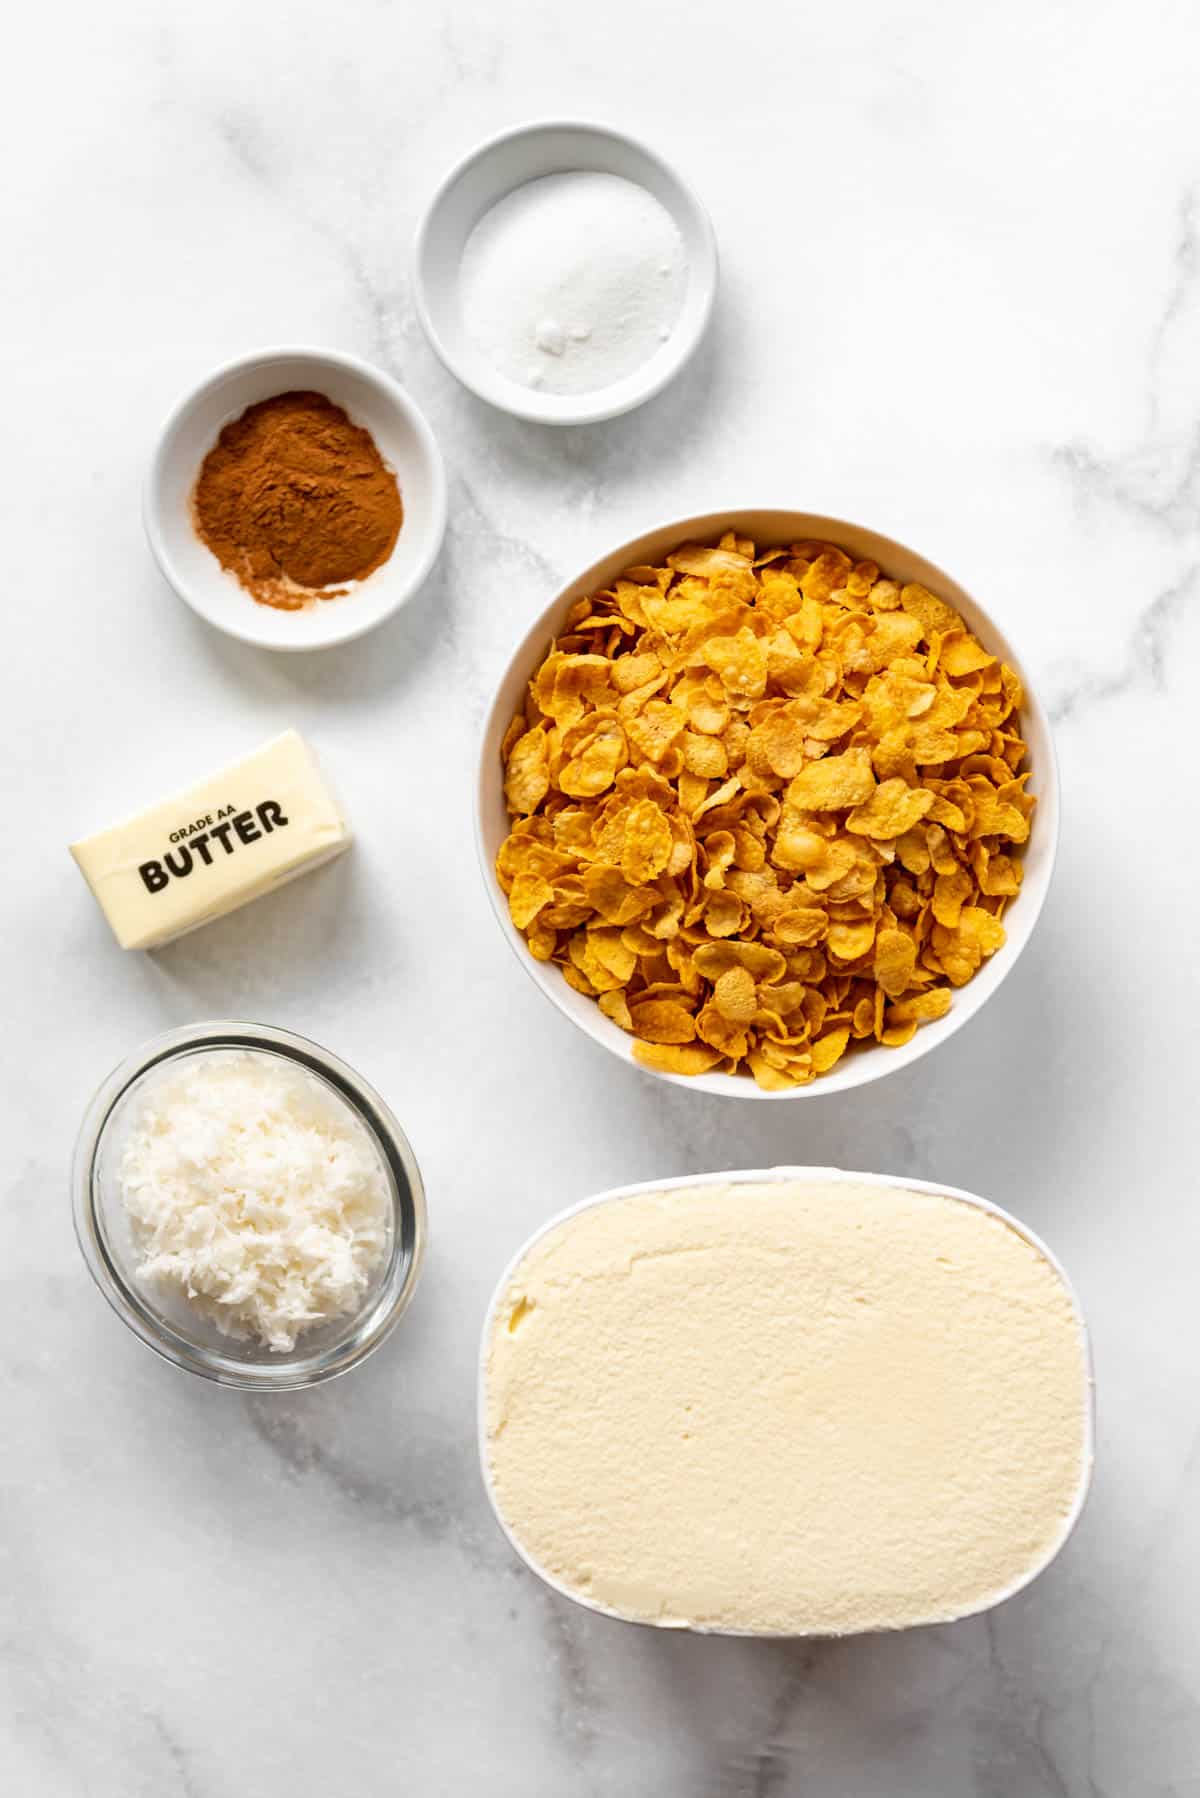 Ingredients for fried ice cream.